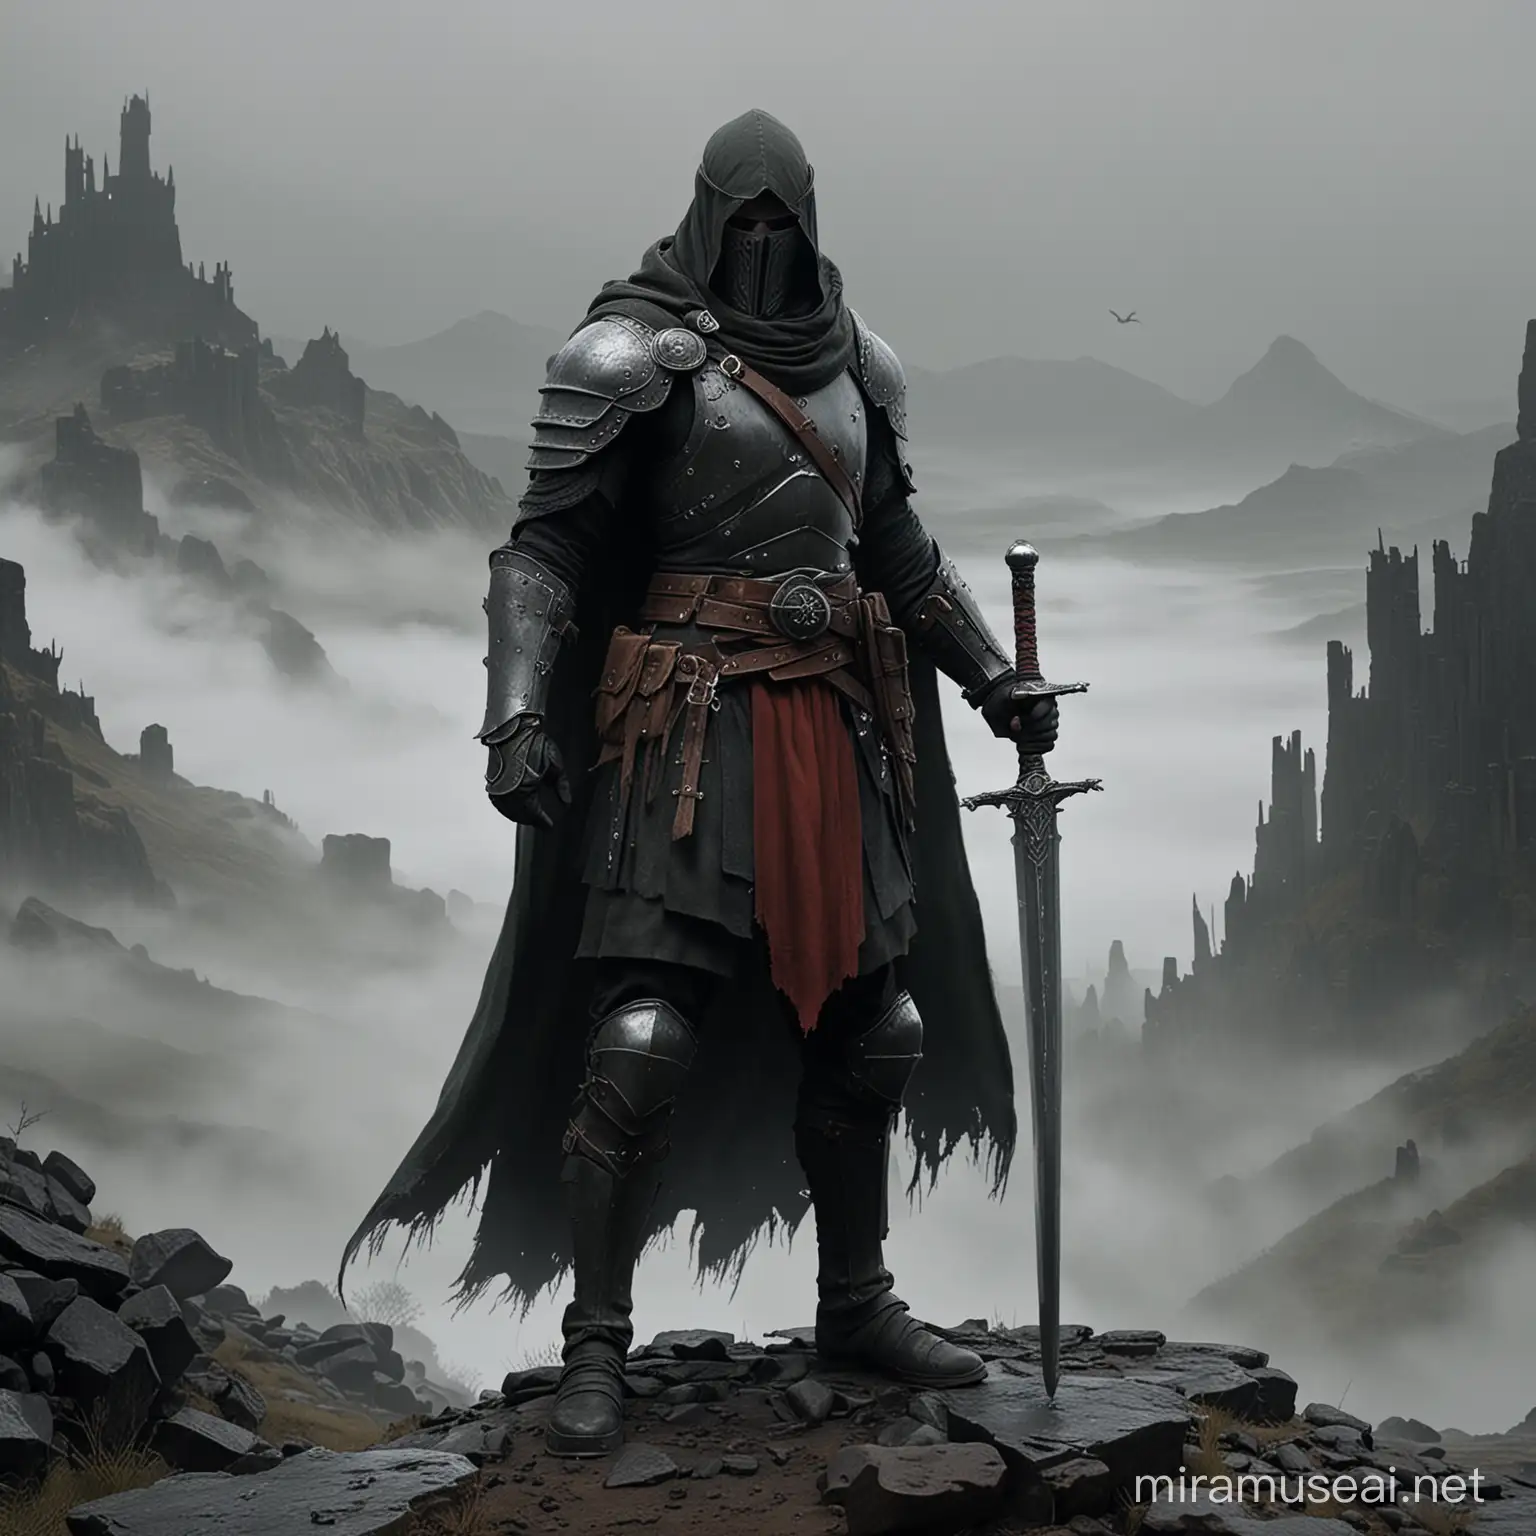 EQUIPED WITH HALBERT NOT SWORD Render a scene depicting Alva the Wayfarer, adorned in his dark, weathered armor, standing amidst a desolate, fog-covered landscape reminiscent of the Dark Souls universe. Equiped with a shield and halbert. Armor with red fabric The environment should be dominated by muted shades of gray and black, with occasional hints of sickly green or blood-red accents. Alva's figure should be illuminated by a faint, eerie light emanating from his enchanted sword, casting long shadows that dance across the uneven terrain. The atmosphere should evoke a sense of loneliness and melancholy, with the oppressive weight of Alva's failed mission palpable in the air. 